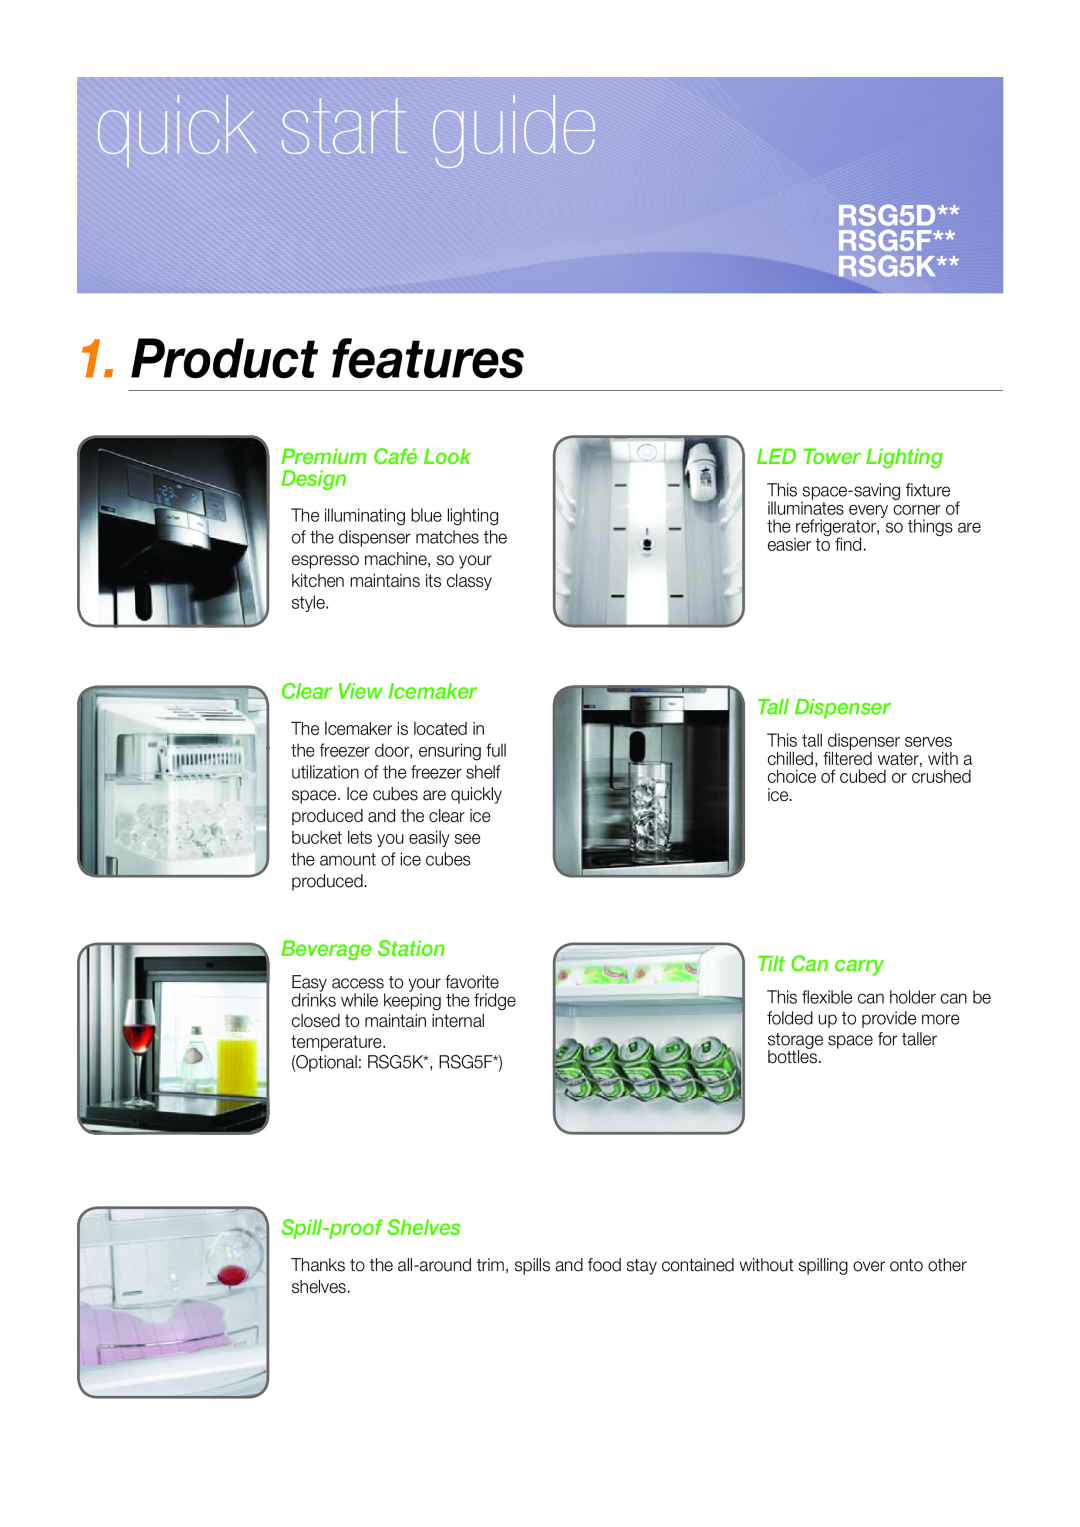 Samsung RSG5F**, RSG5D** quick start Product features, Premium Café Look Design, LED Tower Lighting, Clear View Icemaker 